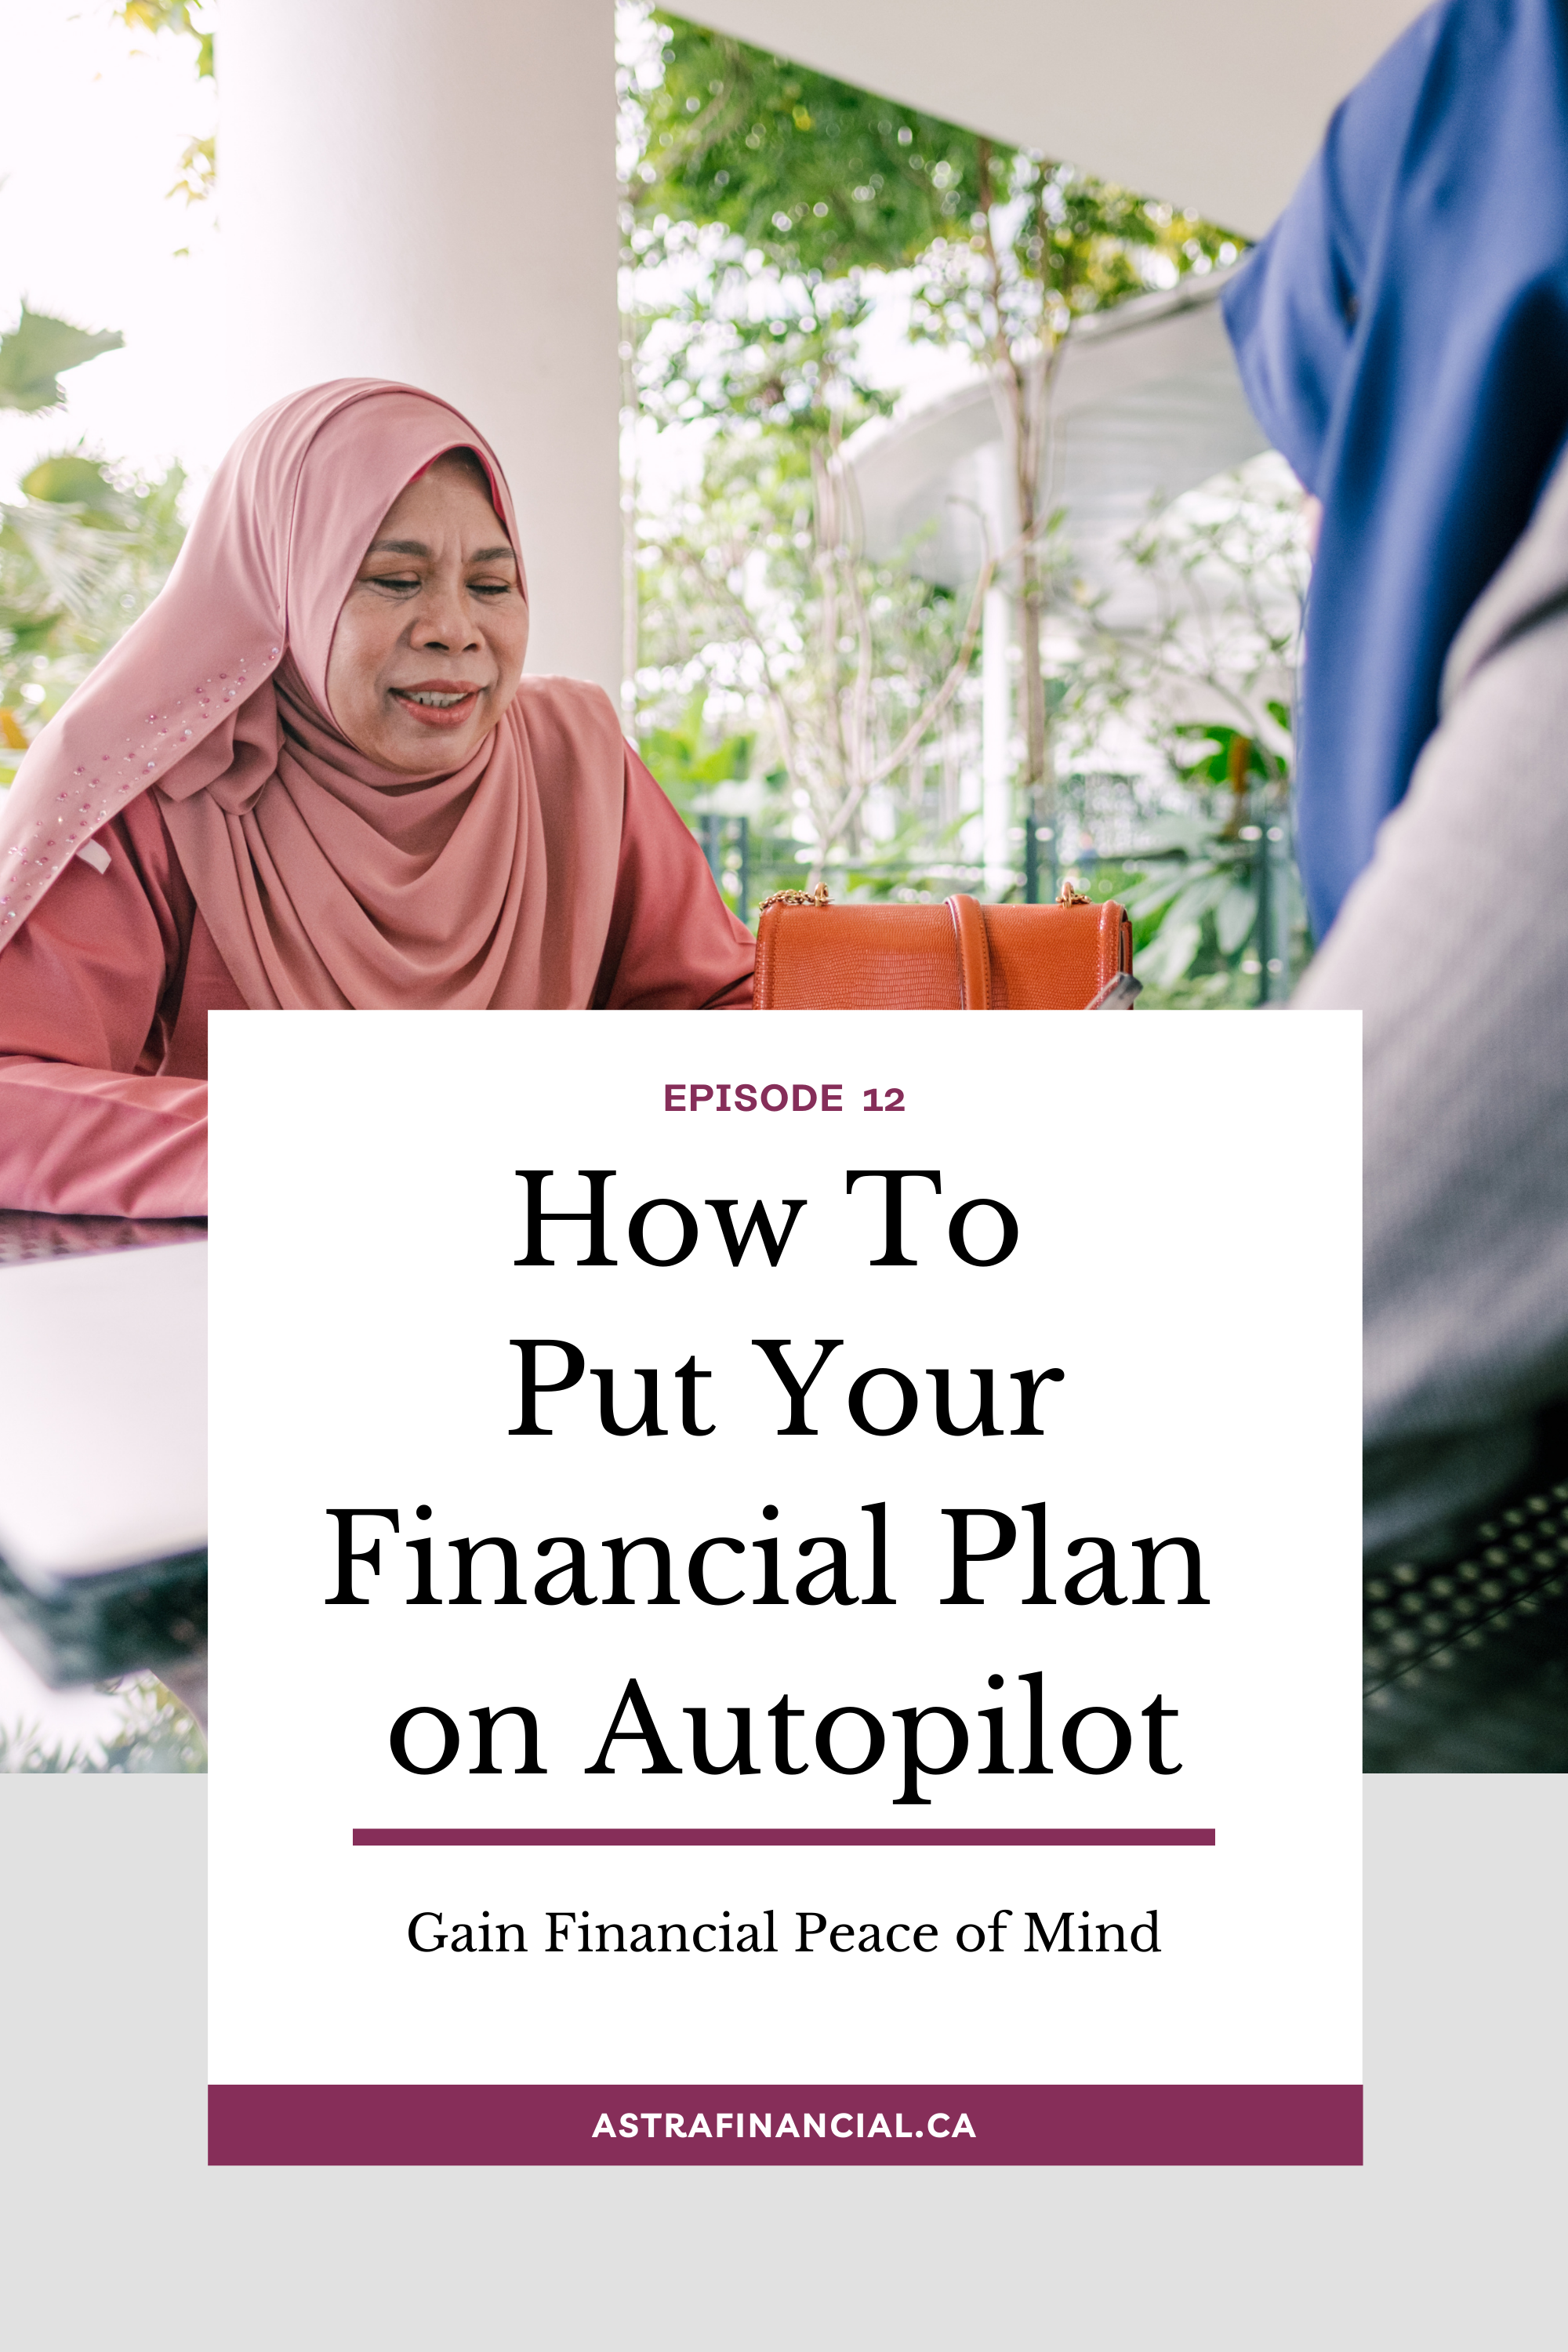 Episode 12 - How To Put Your Financial Plan on Autopilot by Astra Financial